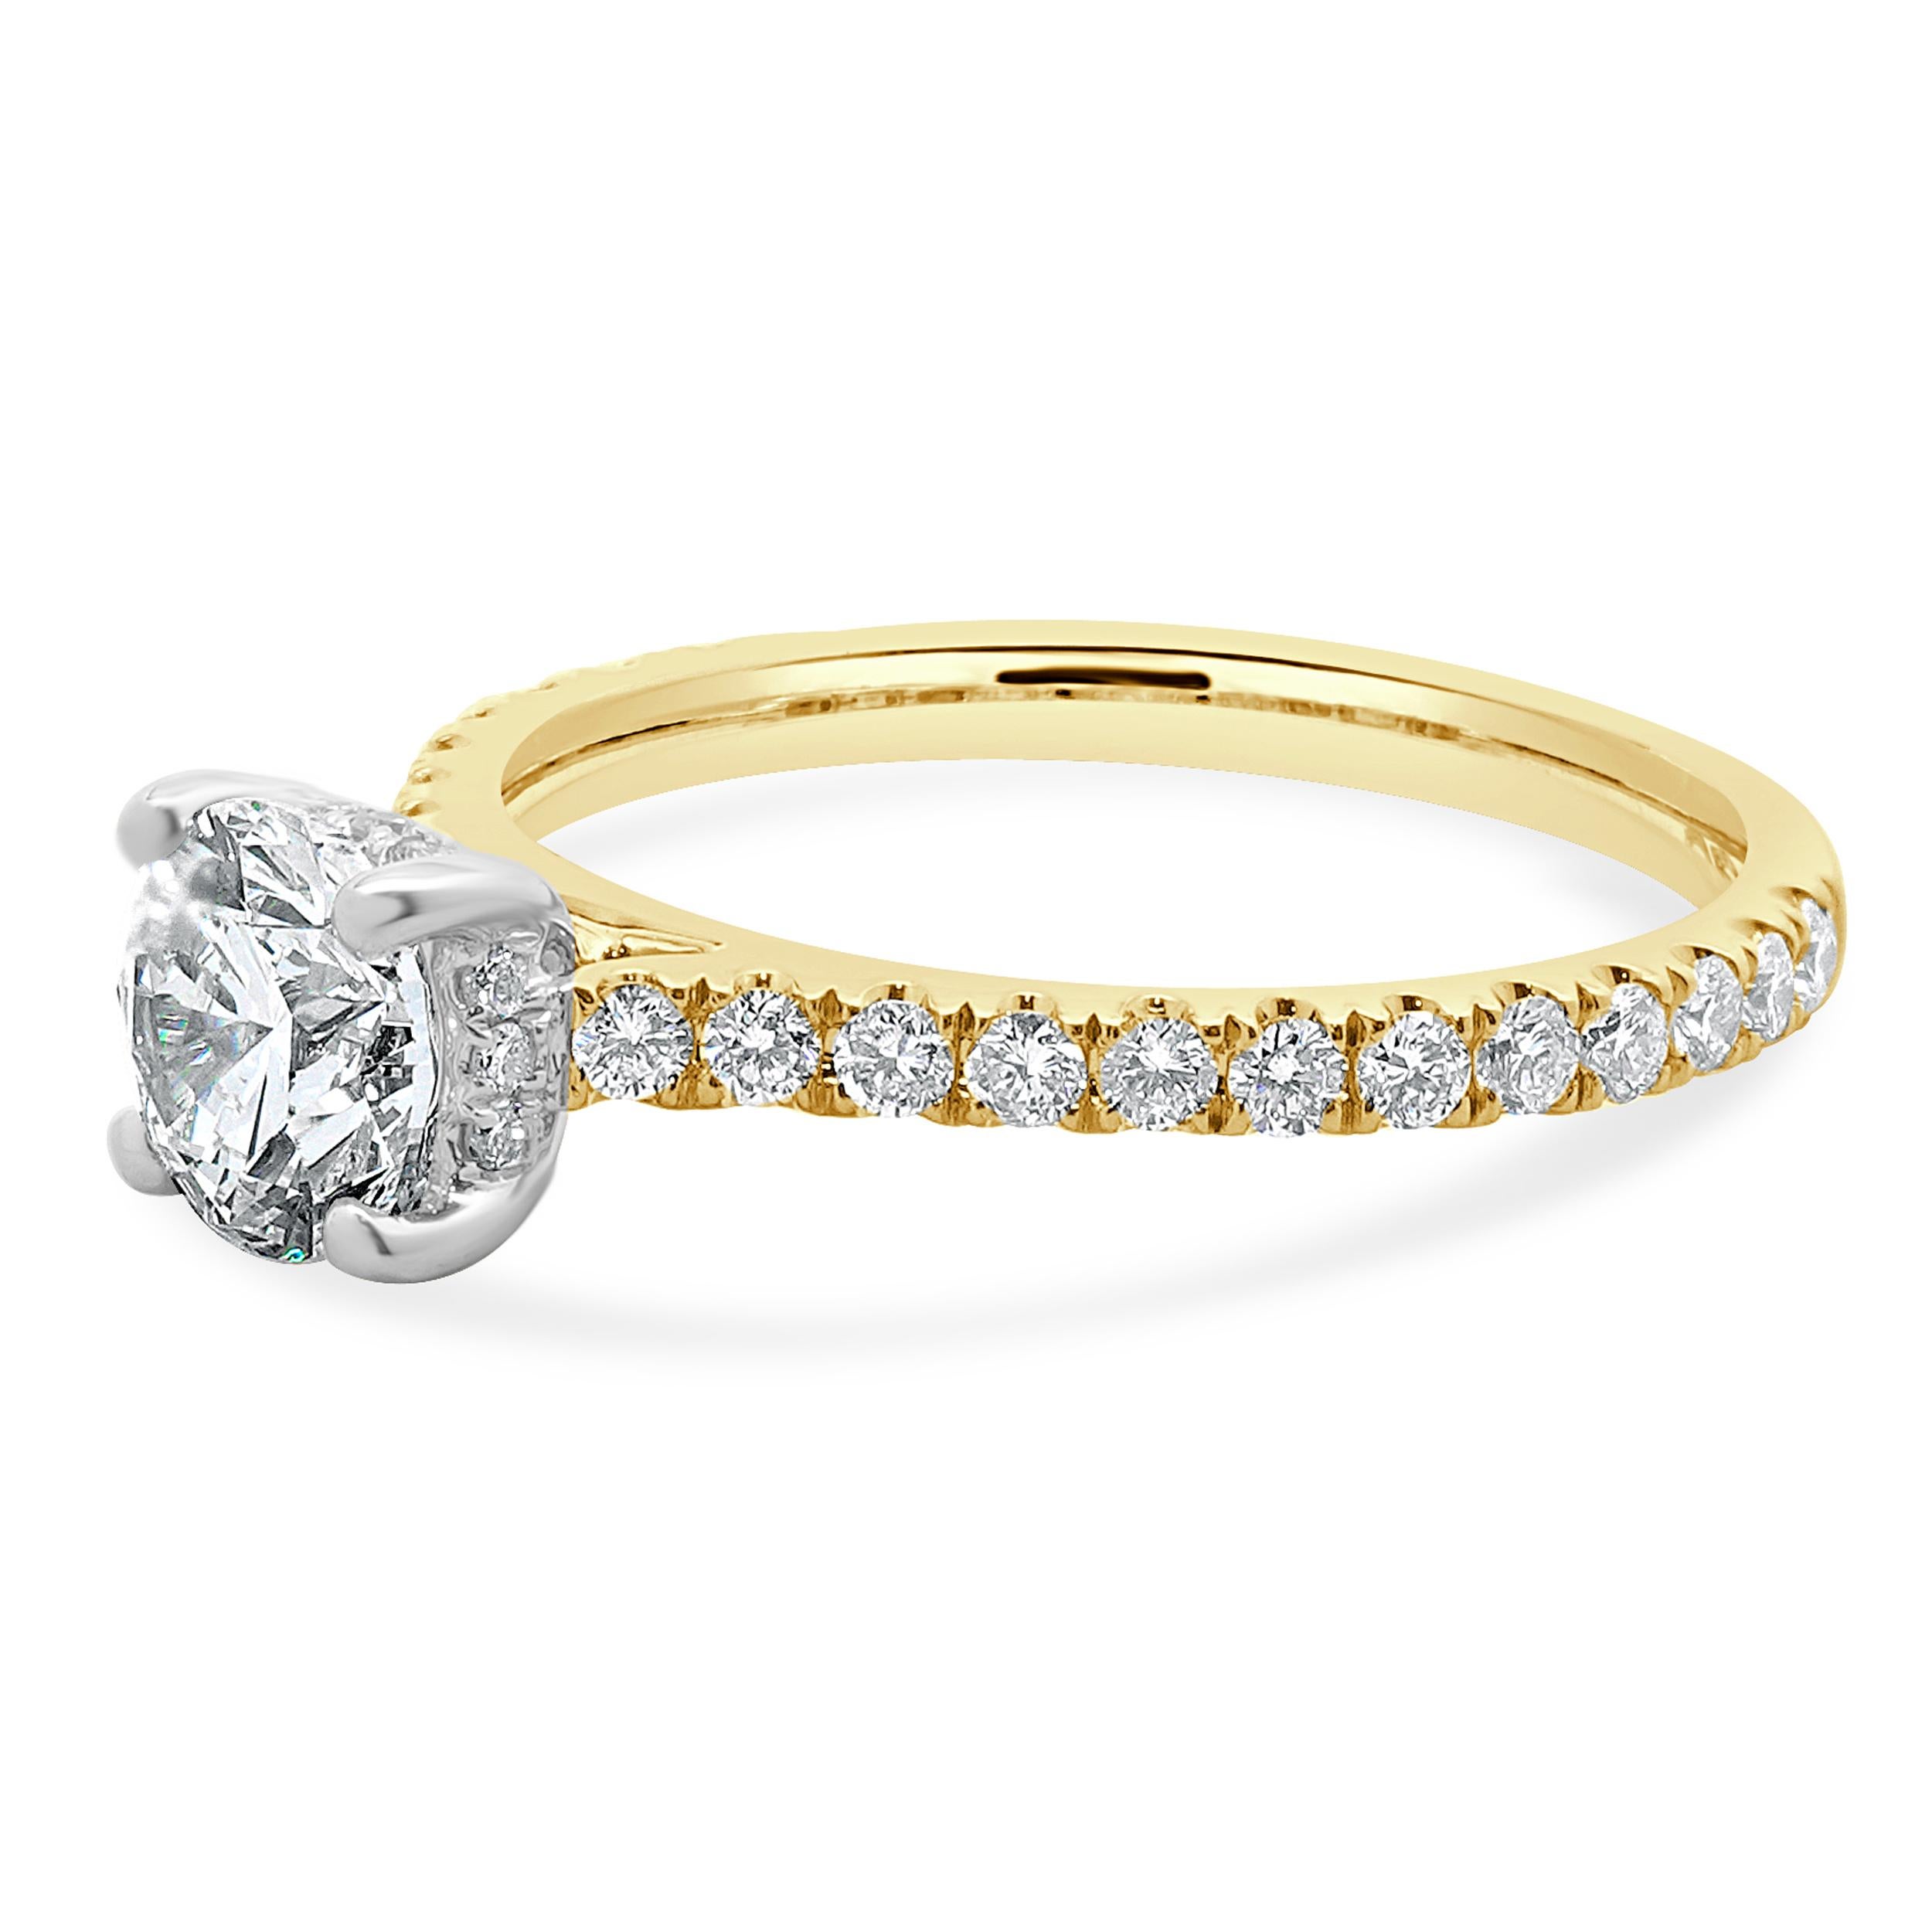 Designer: custom
Material: 14K Yellow Gold
Diamond: 1 round brilliant cut = 1.01ct
Color: H
Clarity: VVS2
Diamond:  36 round brilliant = 0.84cttw
Color: G
Clarity: SI1
Ring Size: 6.75 (complimentary sizing available)
Weight: 2.49 grams
